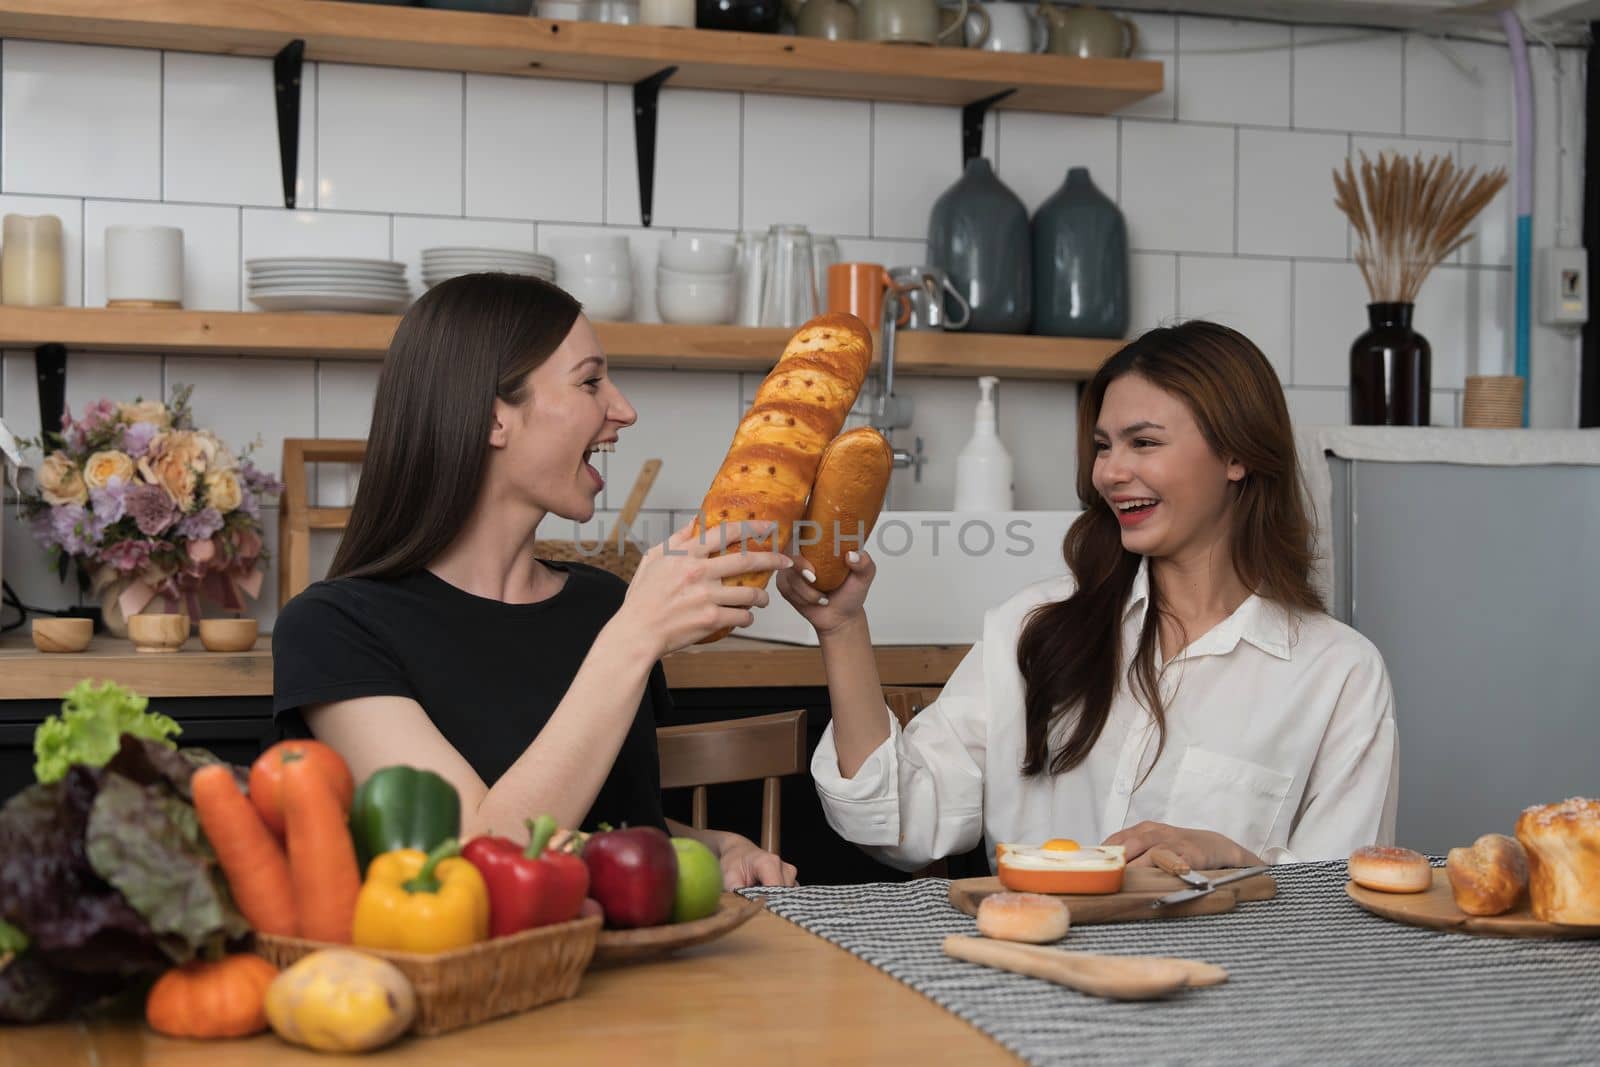 Female and female or LGBT couples are happily cooking bread together with happy smiling face in kitchen at home by wichayada